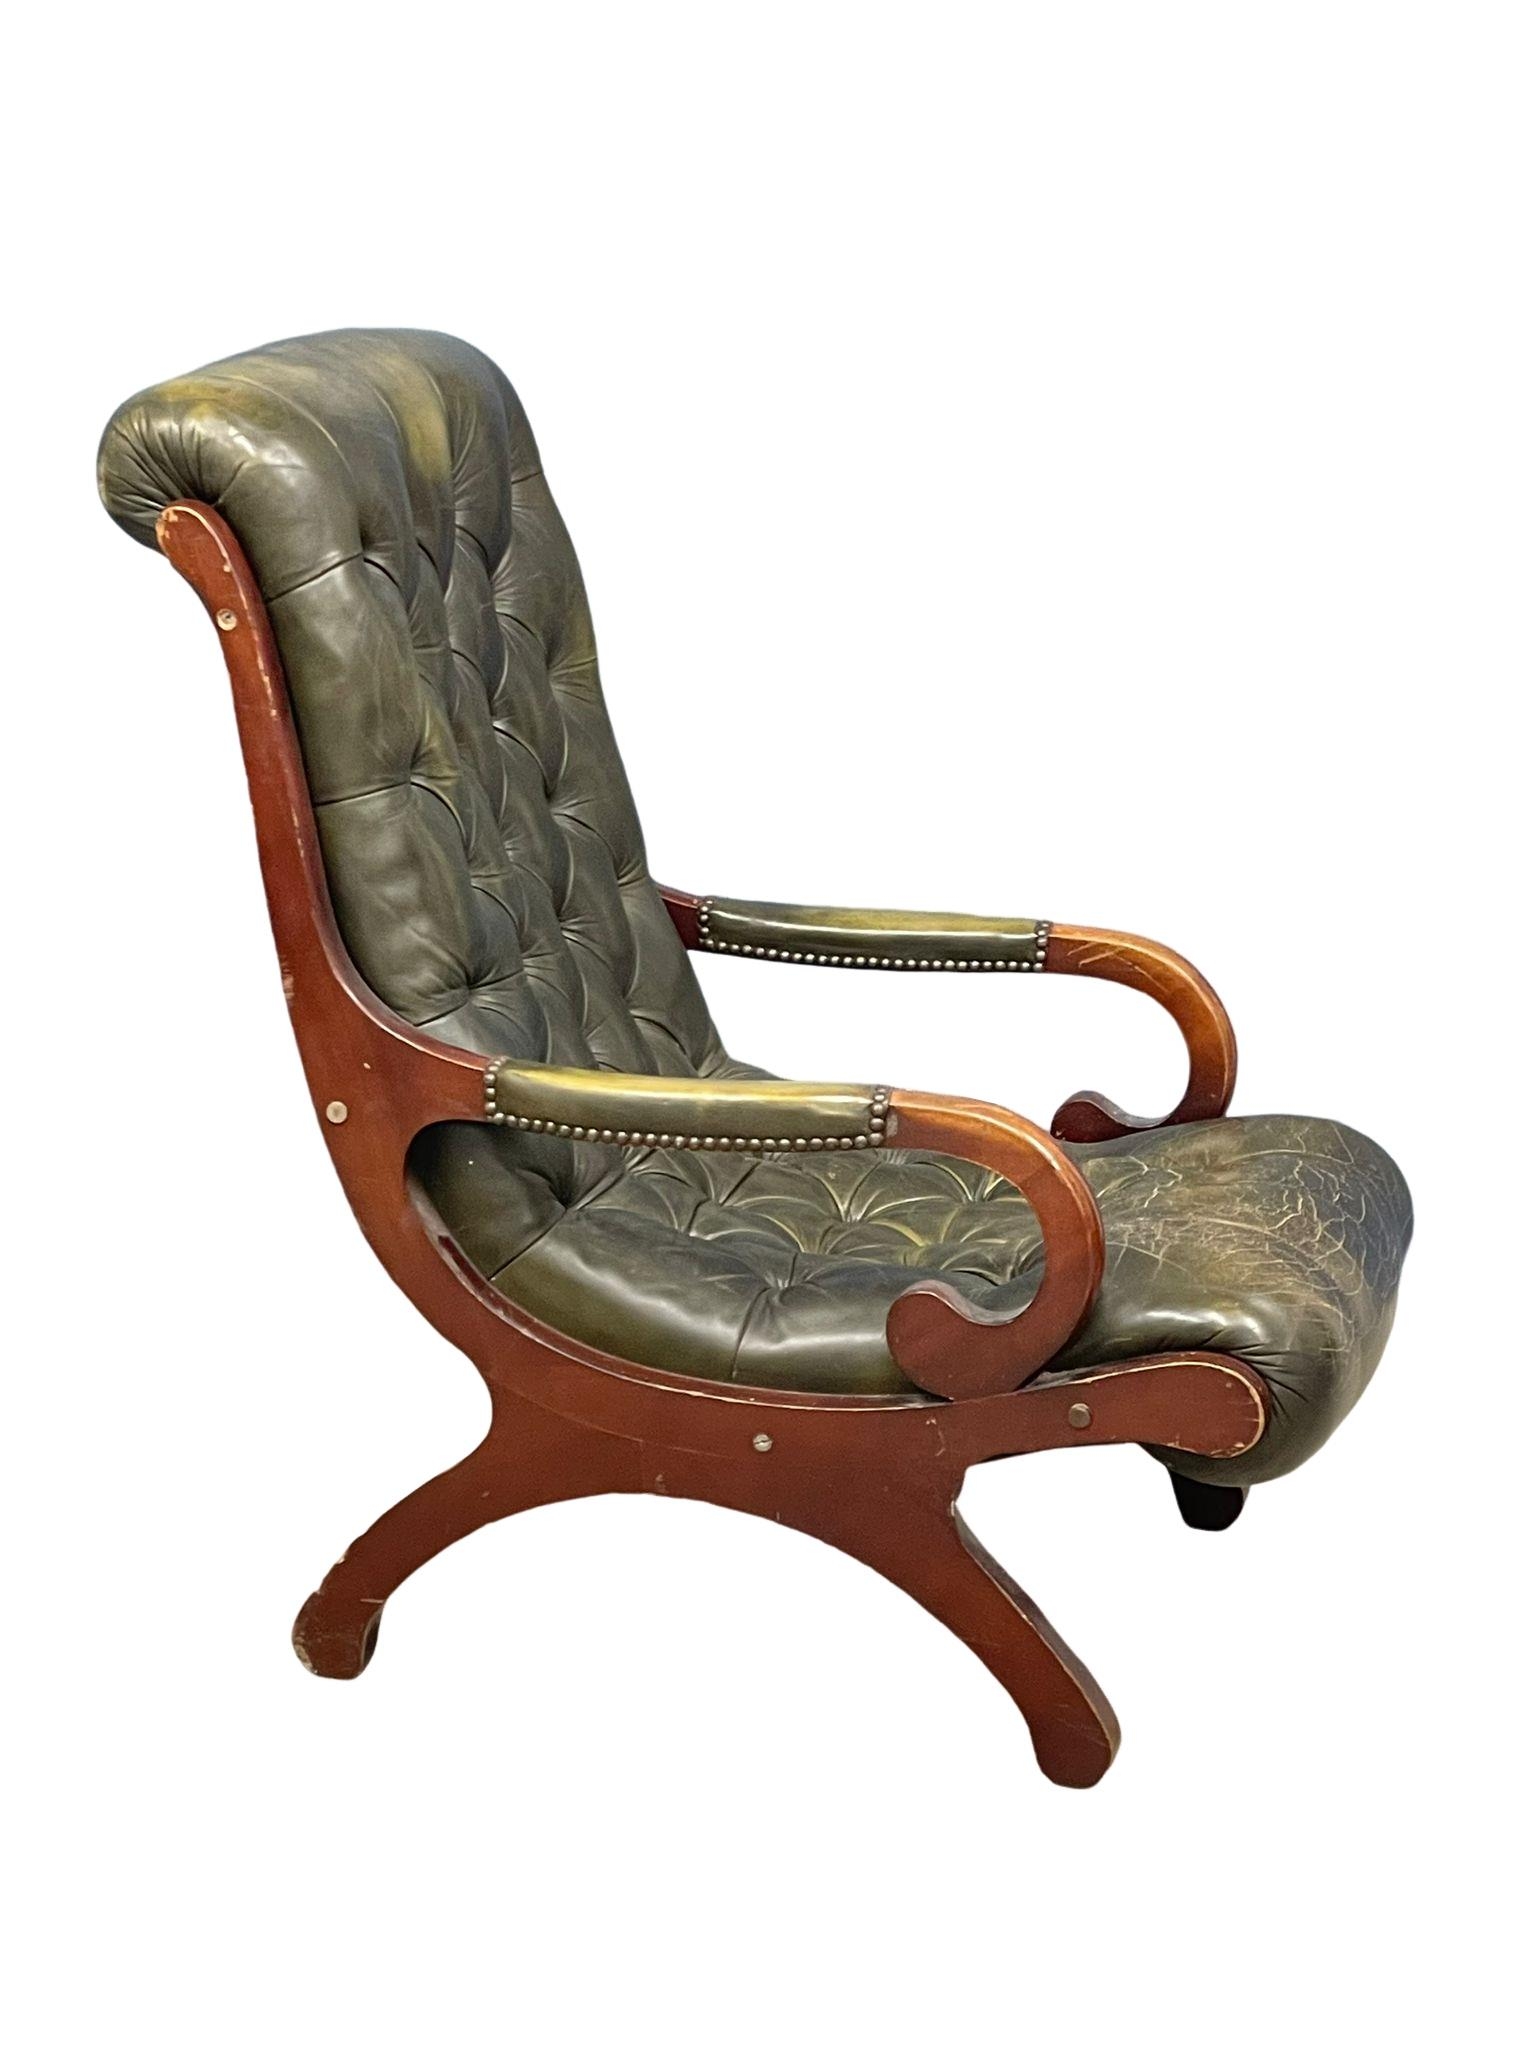 A Regency style deep button leather armchair. - Image 3 of 3